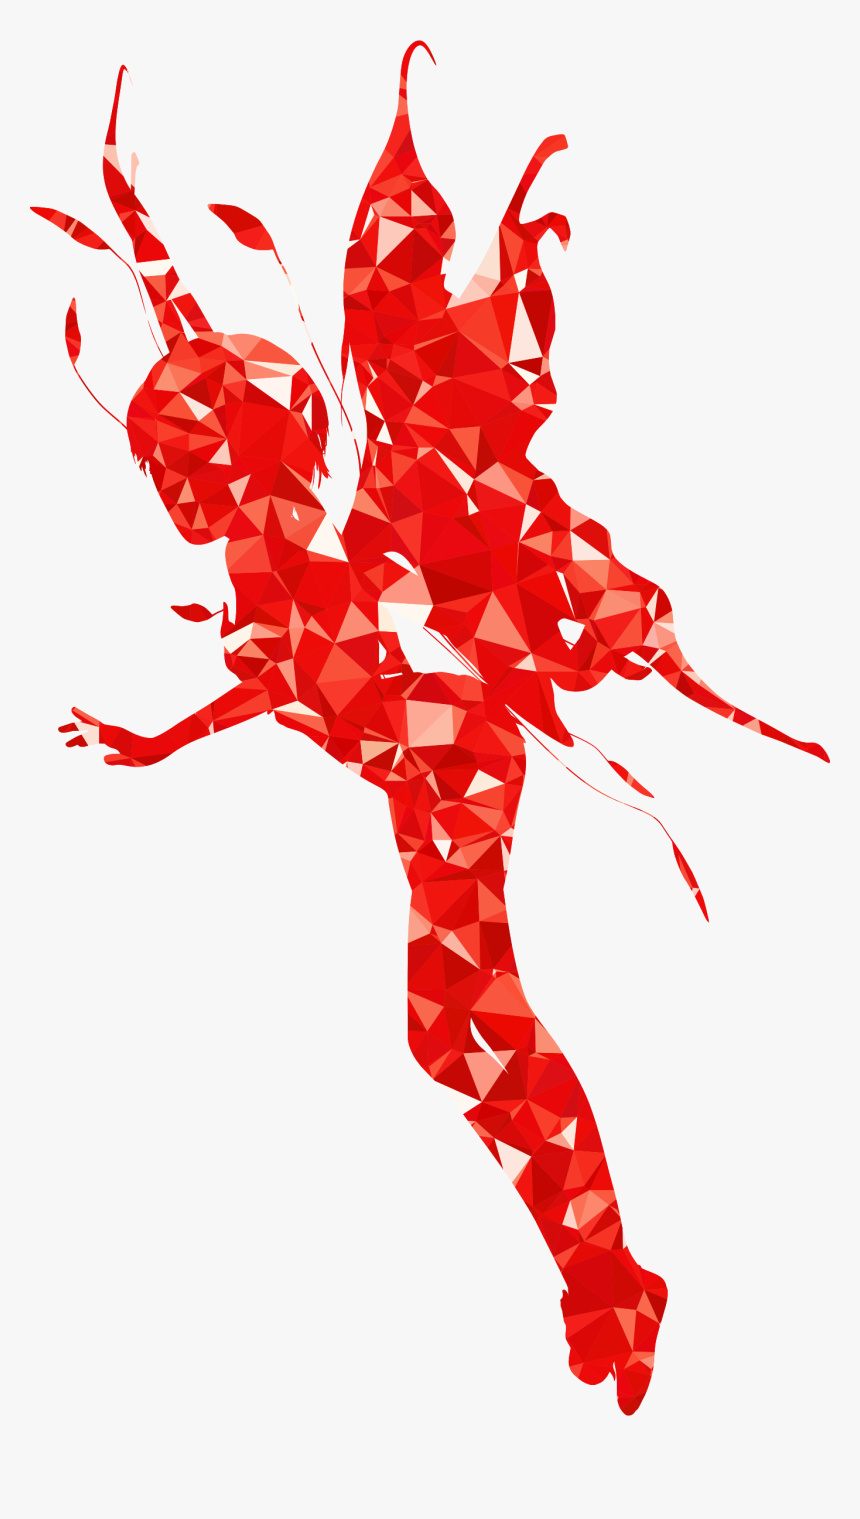 Ruby Female Fairy Silhouette - Fairy Tale Image Transparent, HD Png Download, Free Download